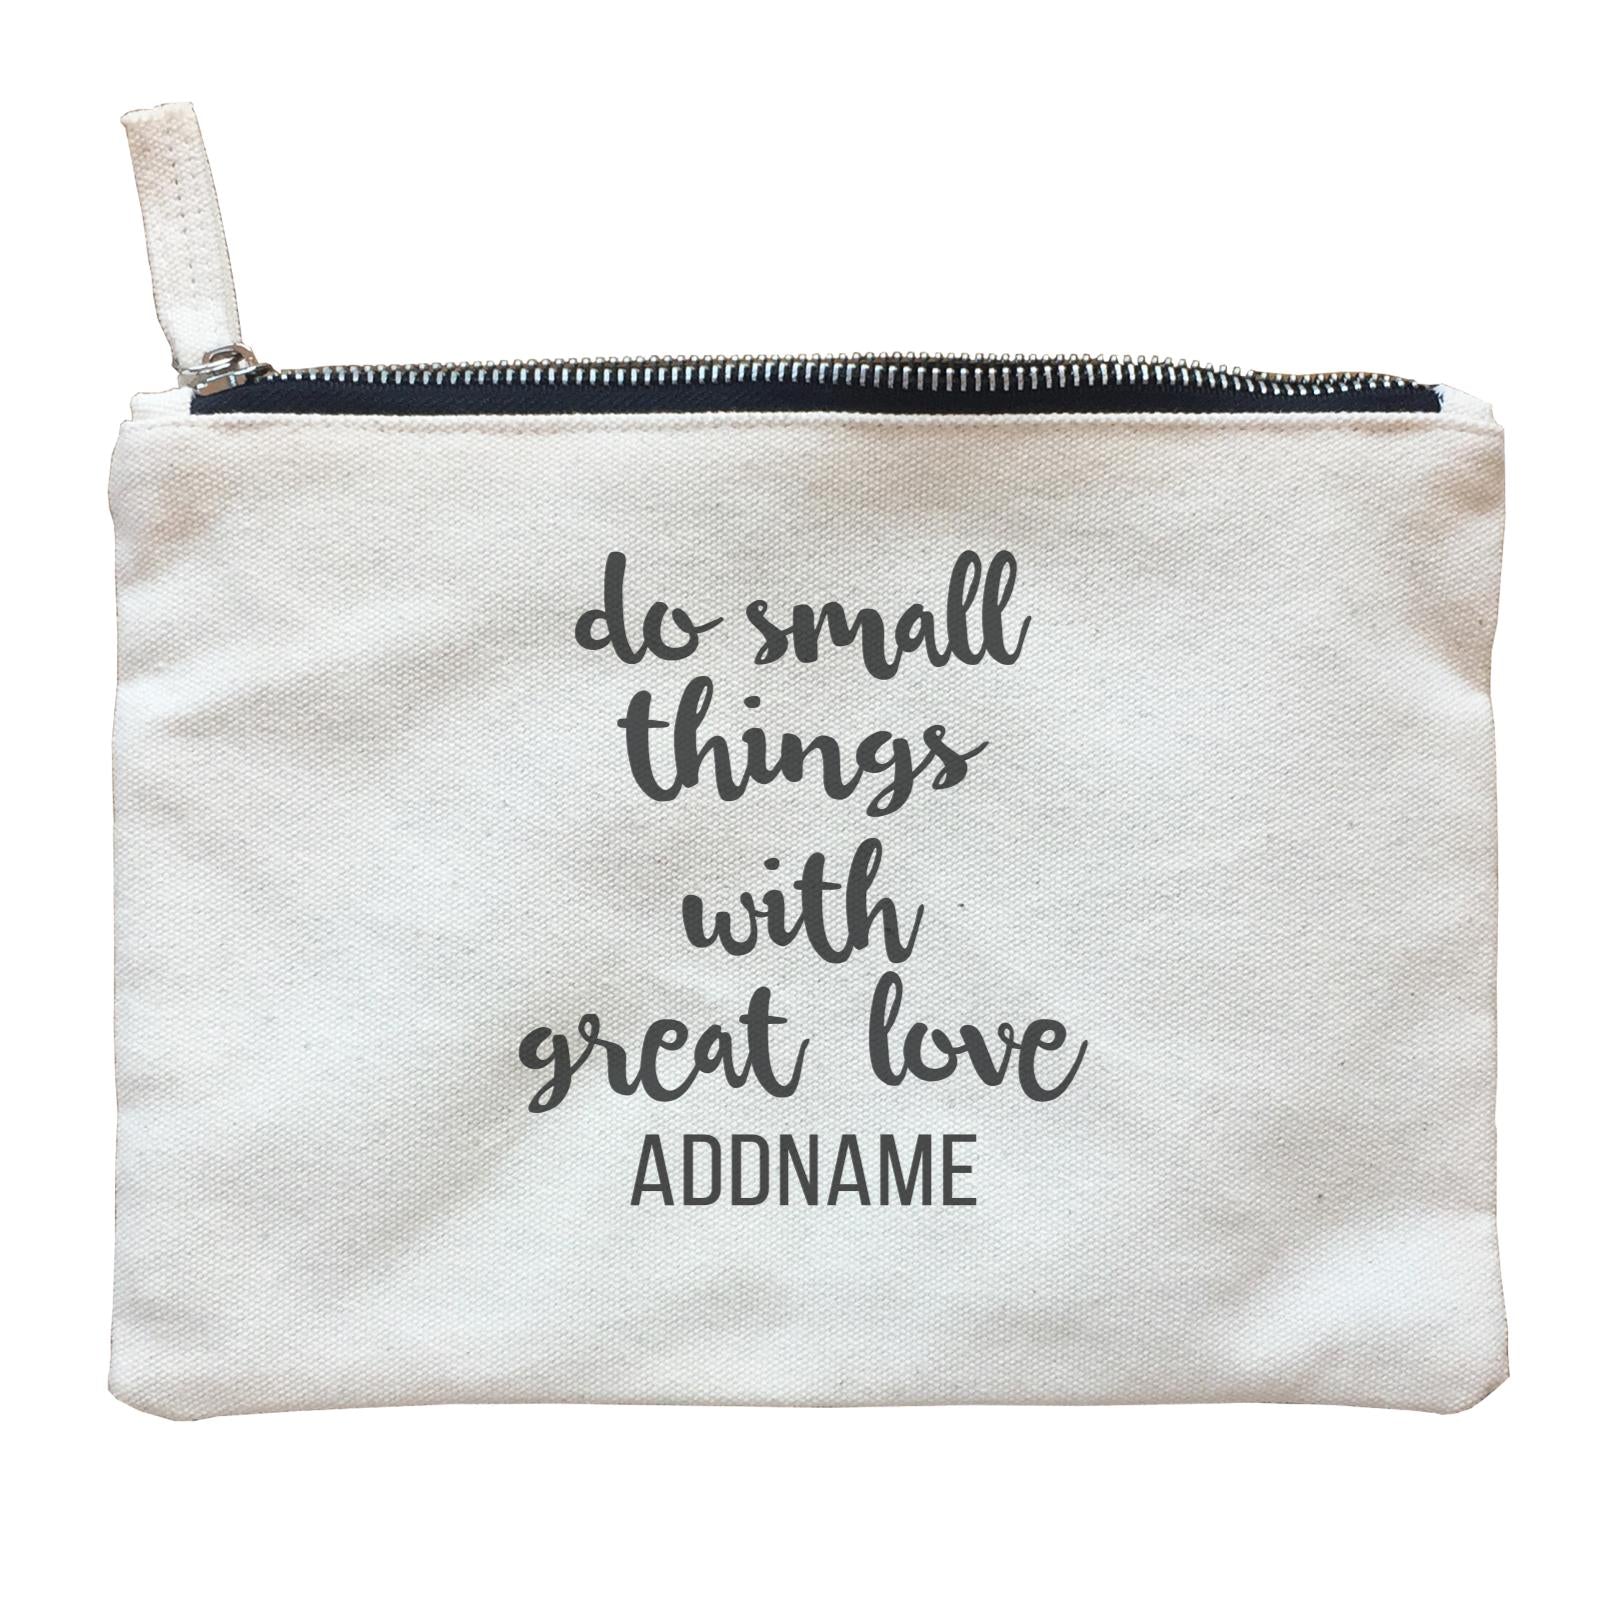 Inspiration Quotes Cursive Do Small Things With Great Love Addname Zipper Pouch